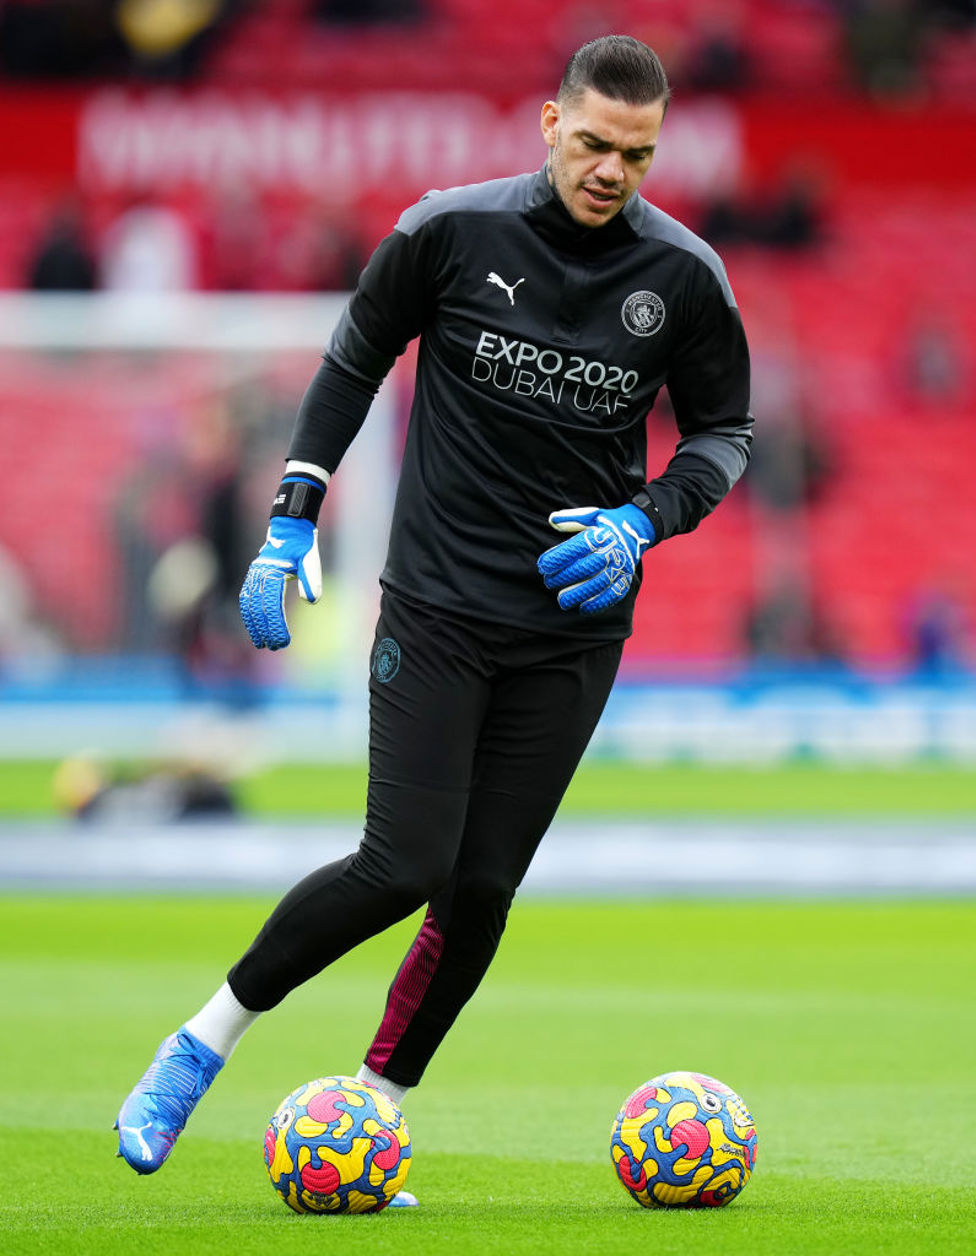 STEADY EDDIE : Our shot-stopper gets in the mood during the warm up.